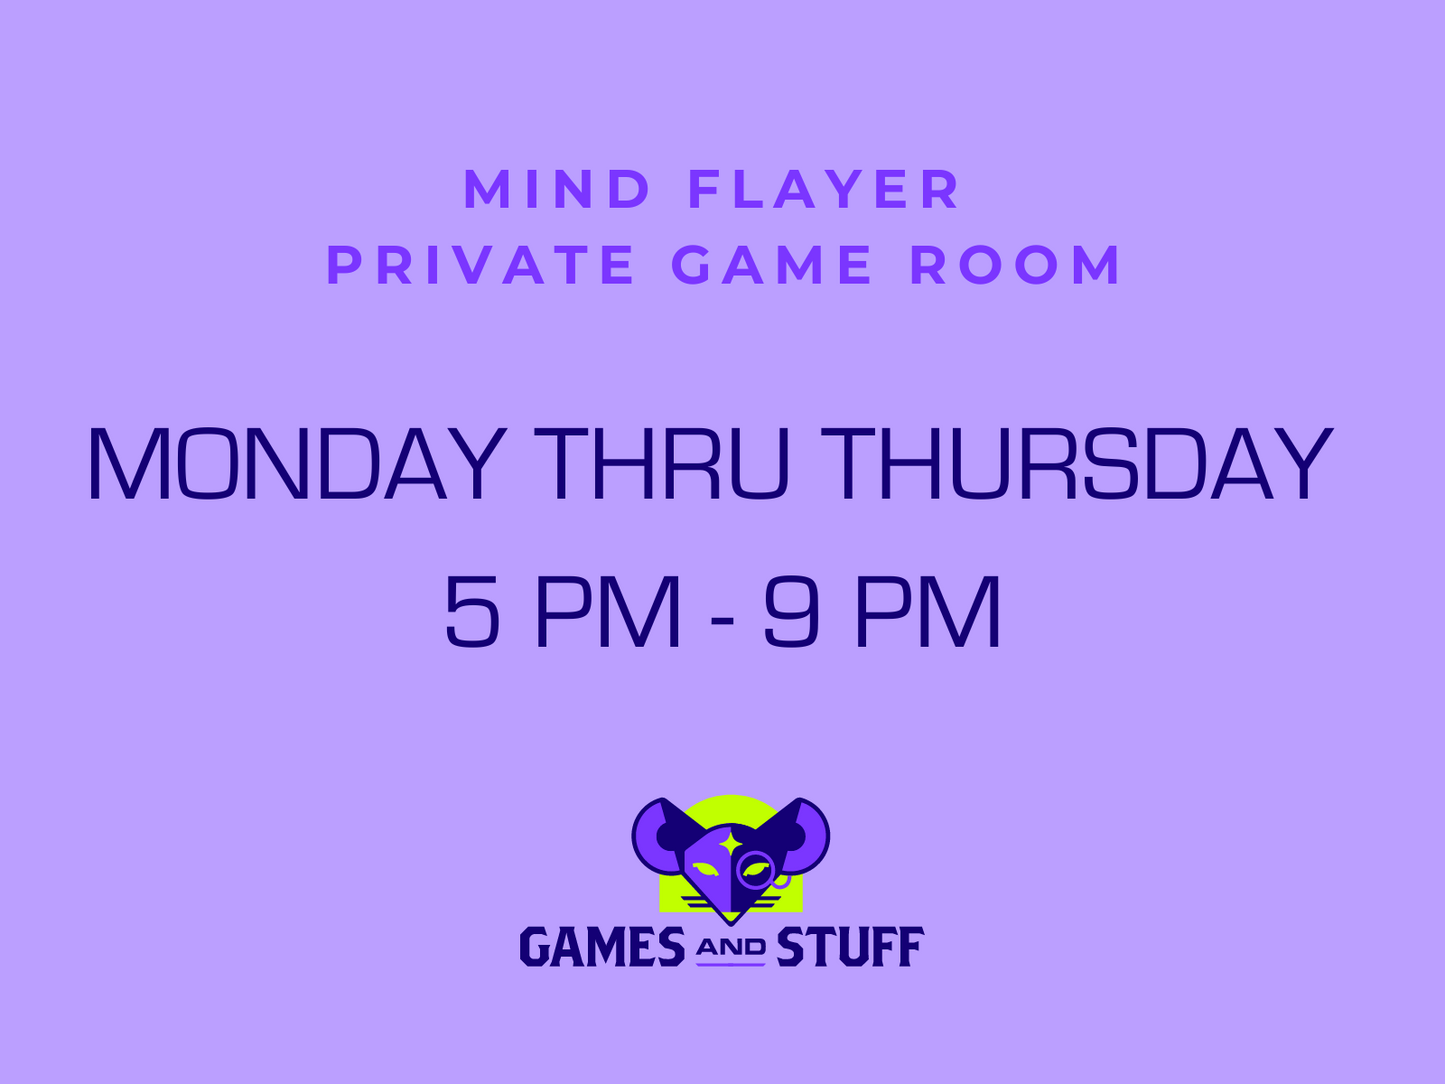 MIND FLAYER PRIVATE GAME ROOM - MONDAY THRU THURSDAY EVENING